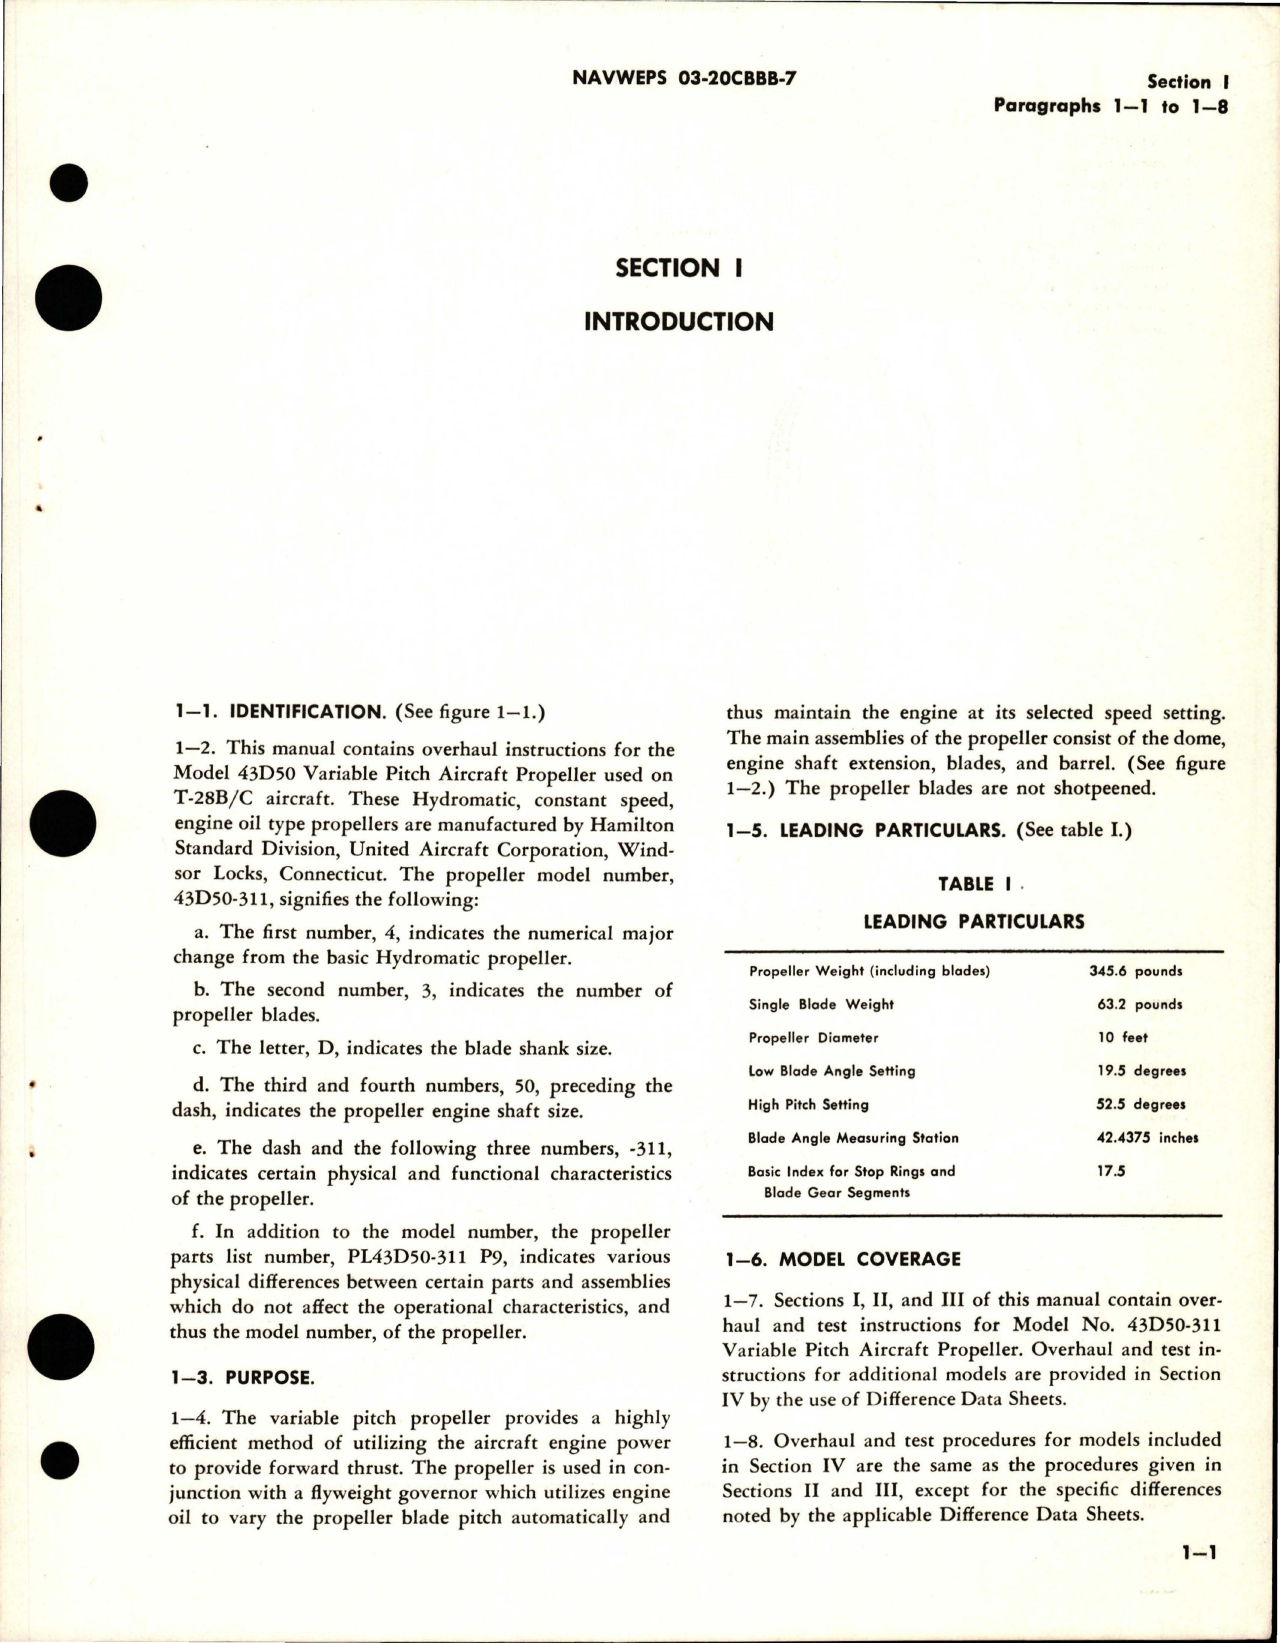 Sample page 5 from AirCorps Library document: Overhaul Instructions for Variable Pitch Aircraft Propeller - Models 43D50-311 and 43D50-321